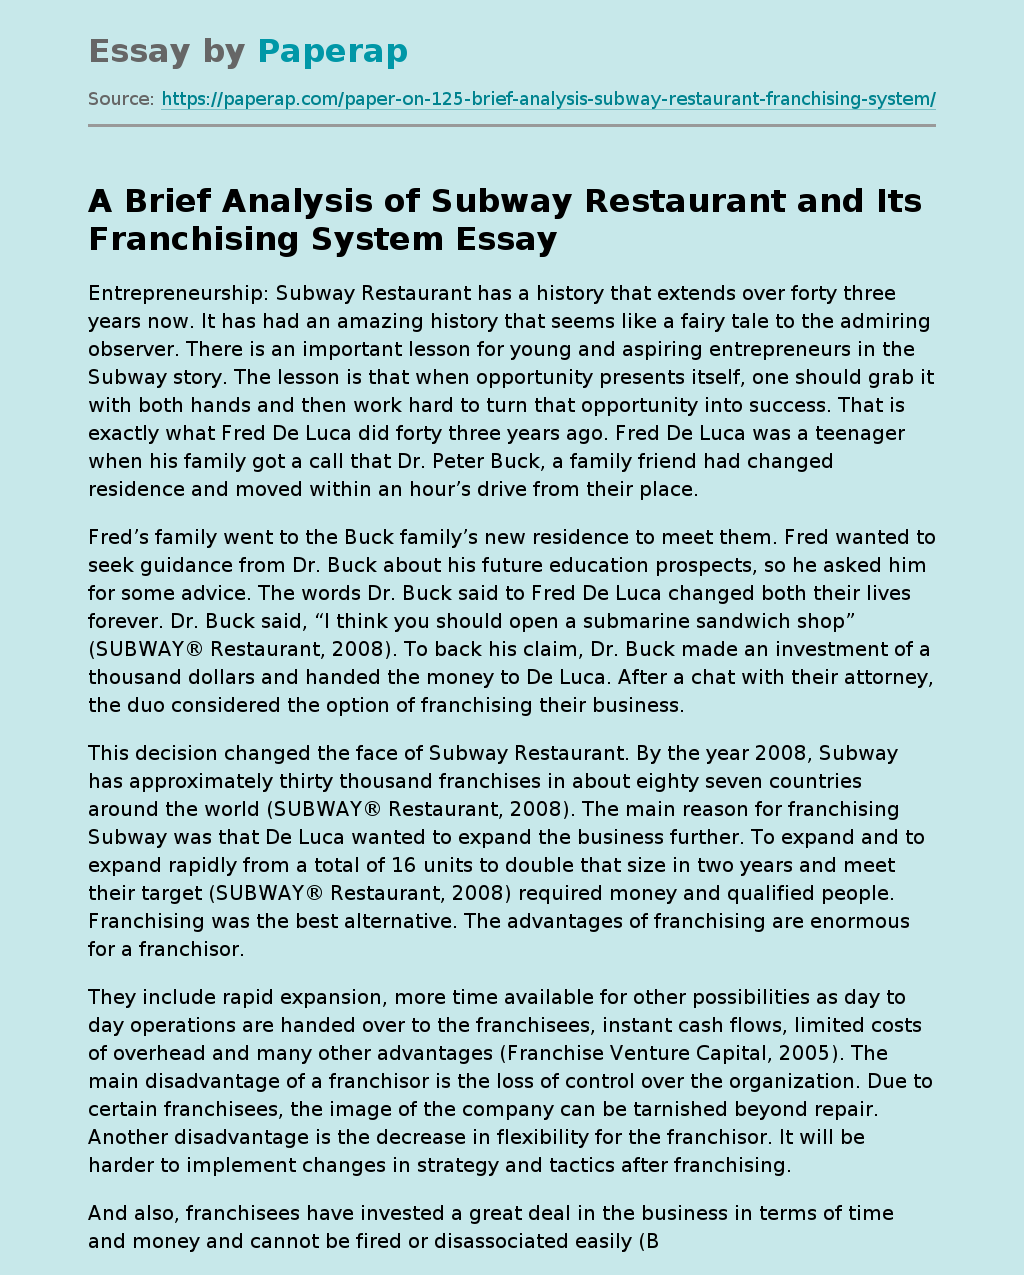 A Brief Analysis of Subway Restaurant and Its Franchising System